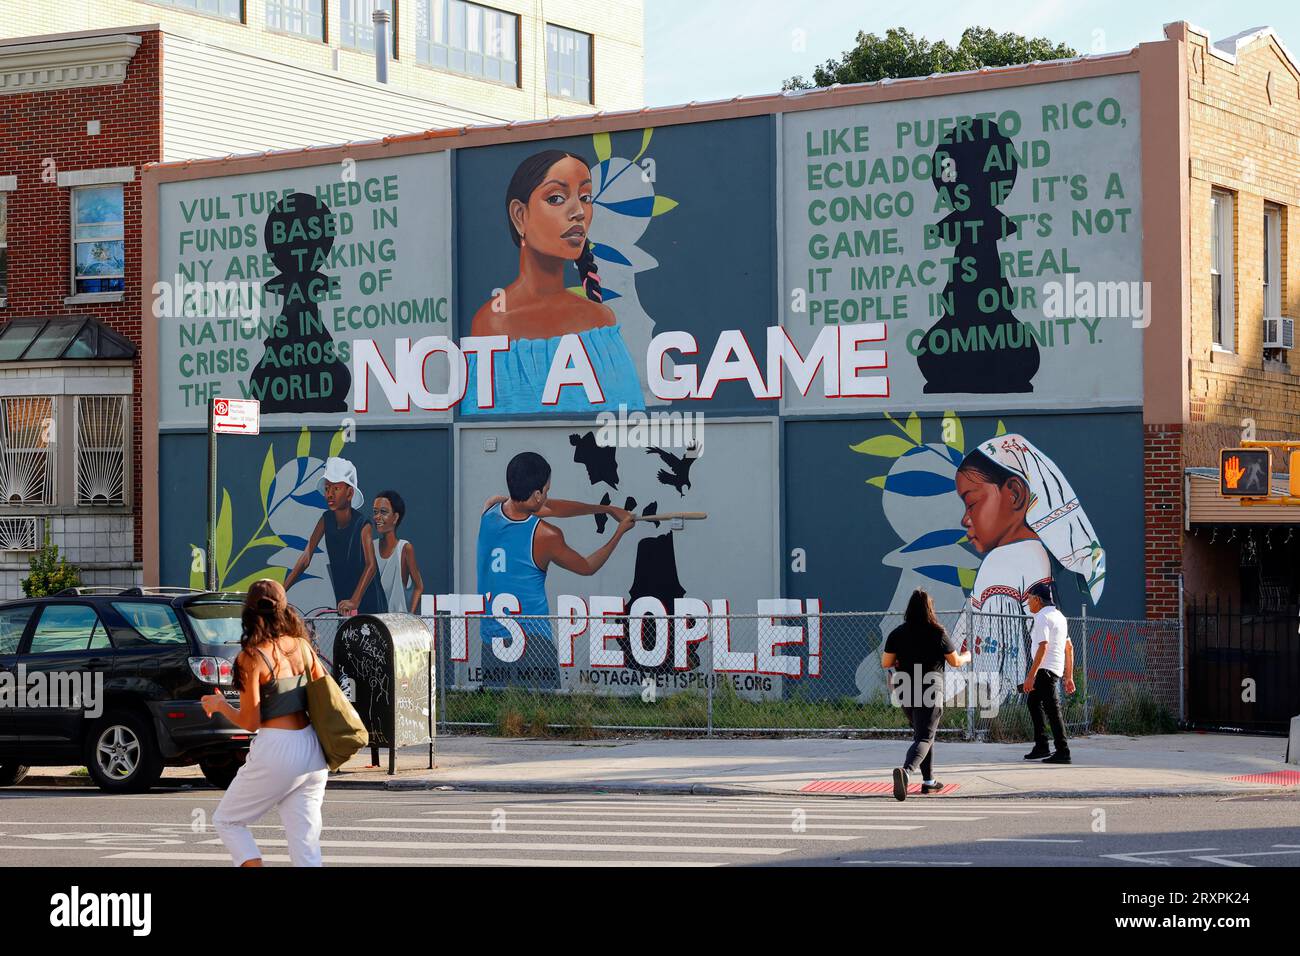 A NYC mural proclaiming 'It's Not A Game, It's People!' refering to vulture hedge funds taking advantage of economically unstable nations in crisis. Stock Photo